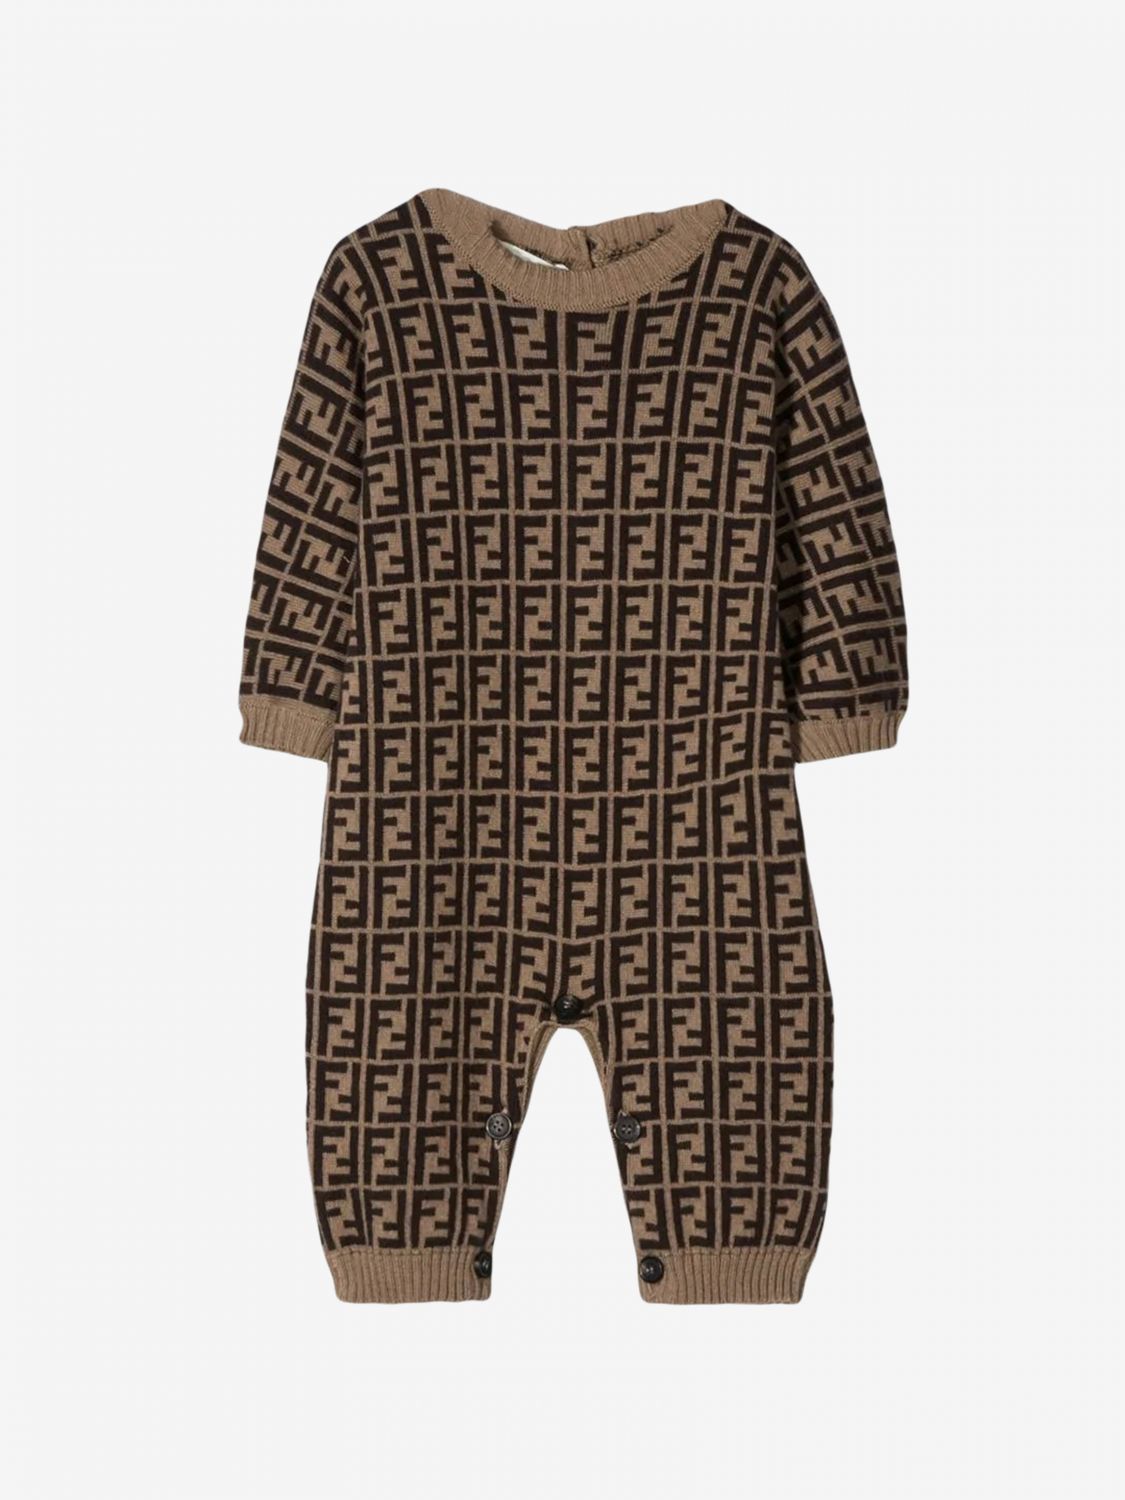 fendi baby outfit